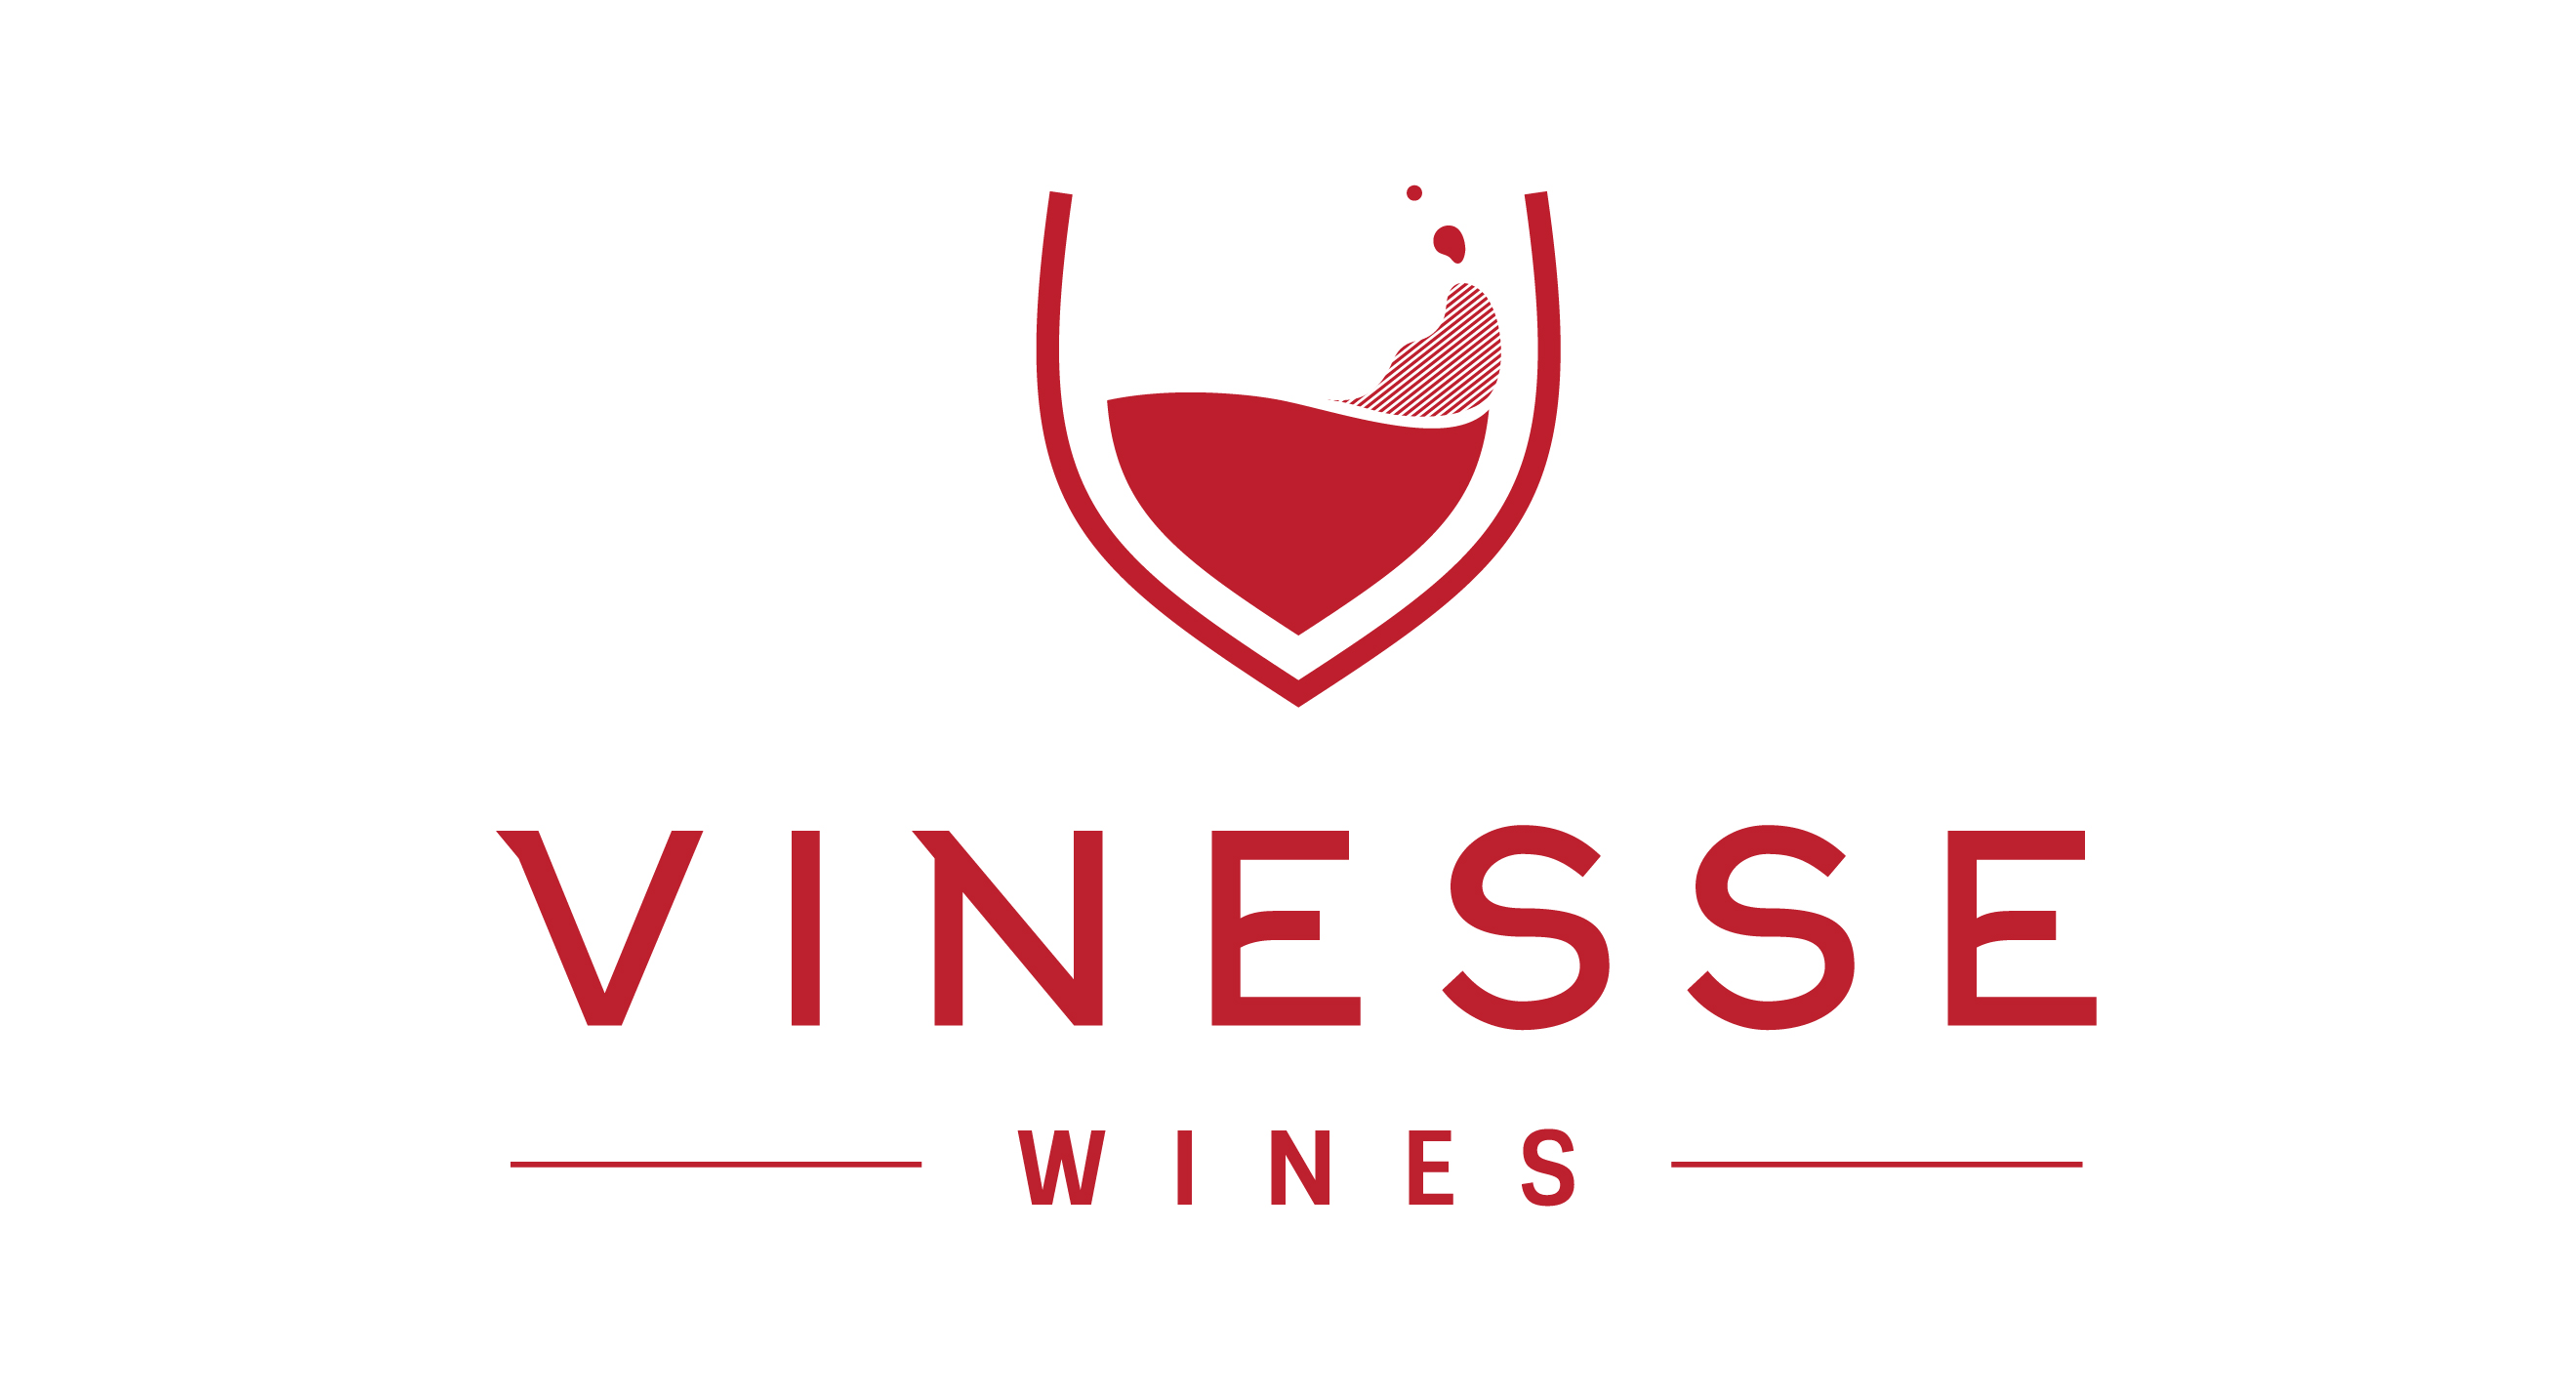 Vinesse Wine Club - Full Company Review - Wine Club Group